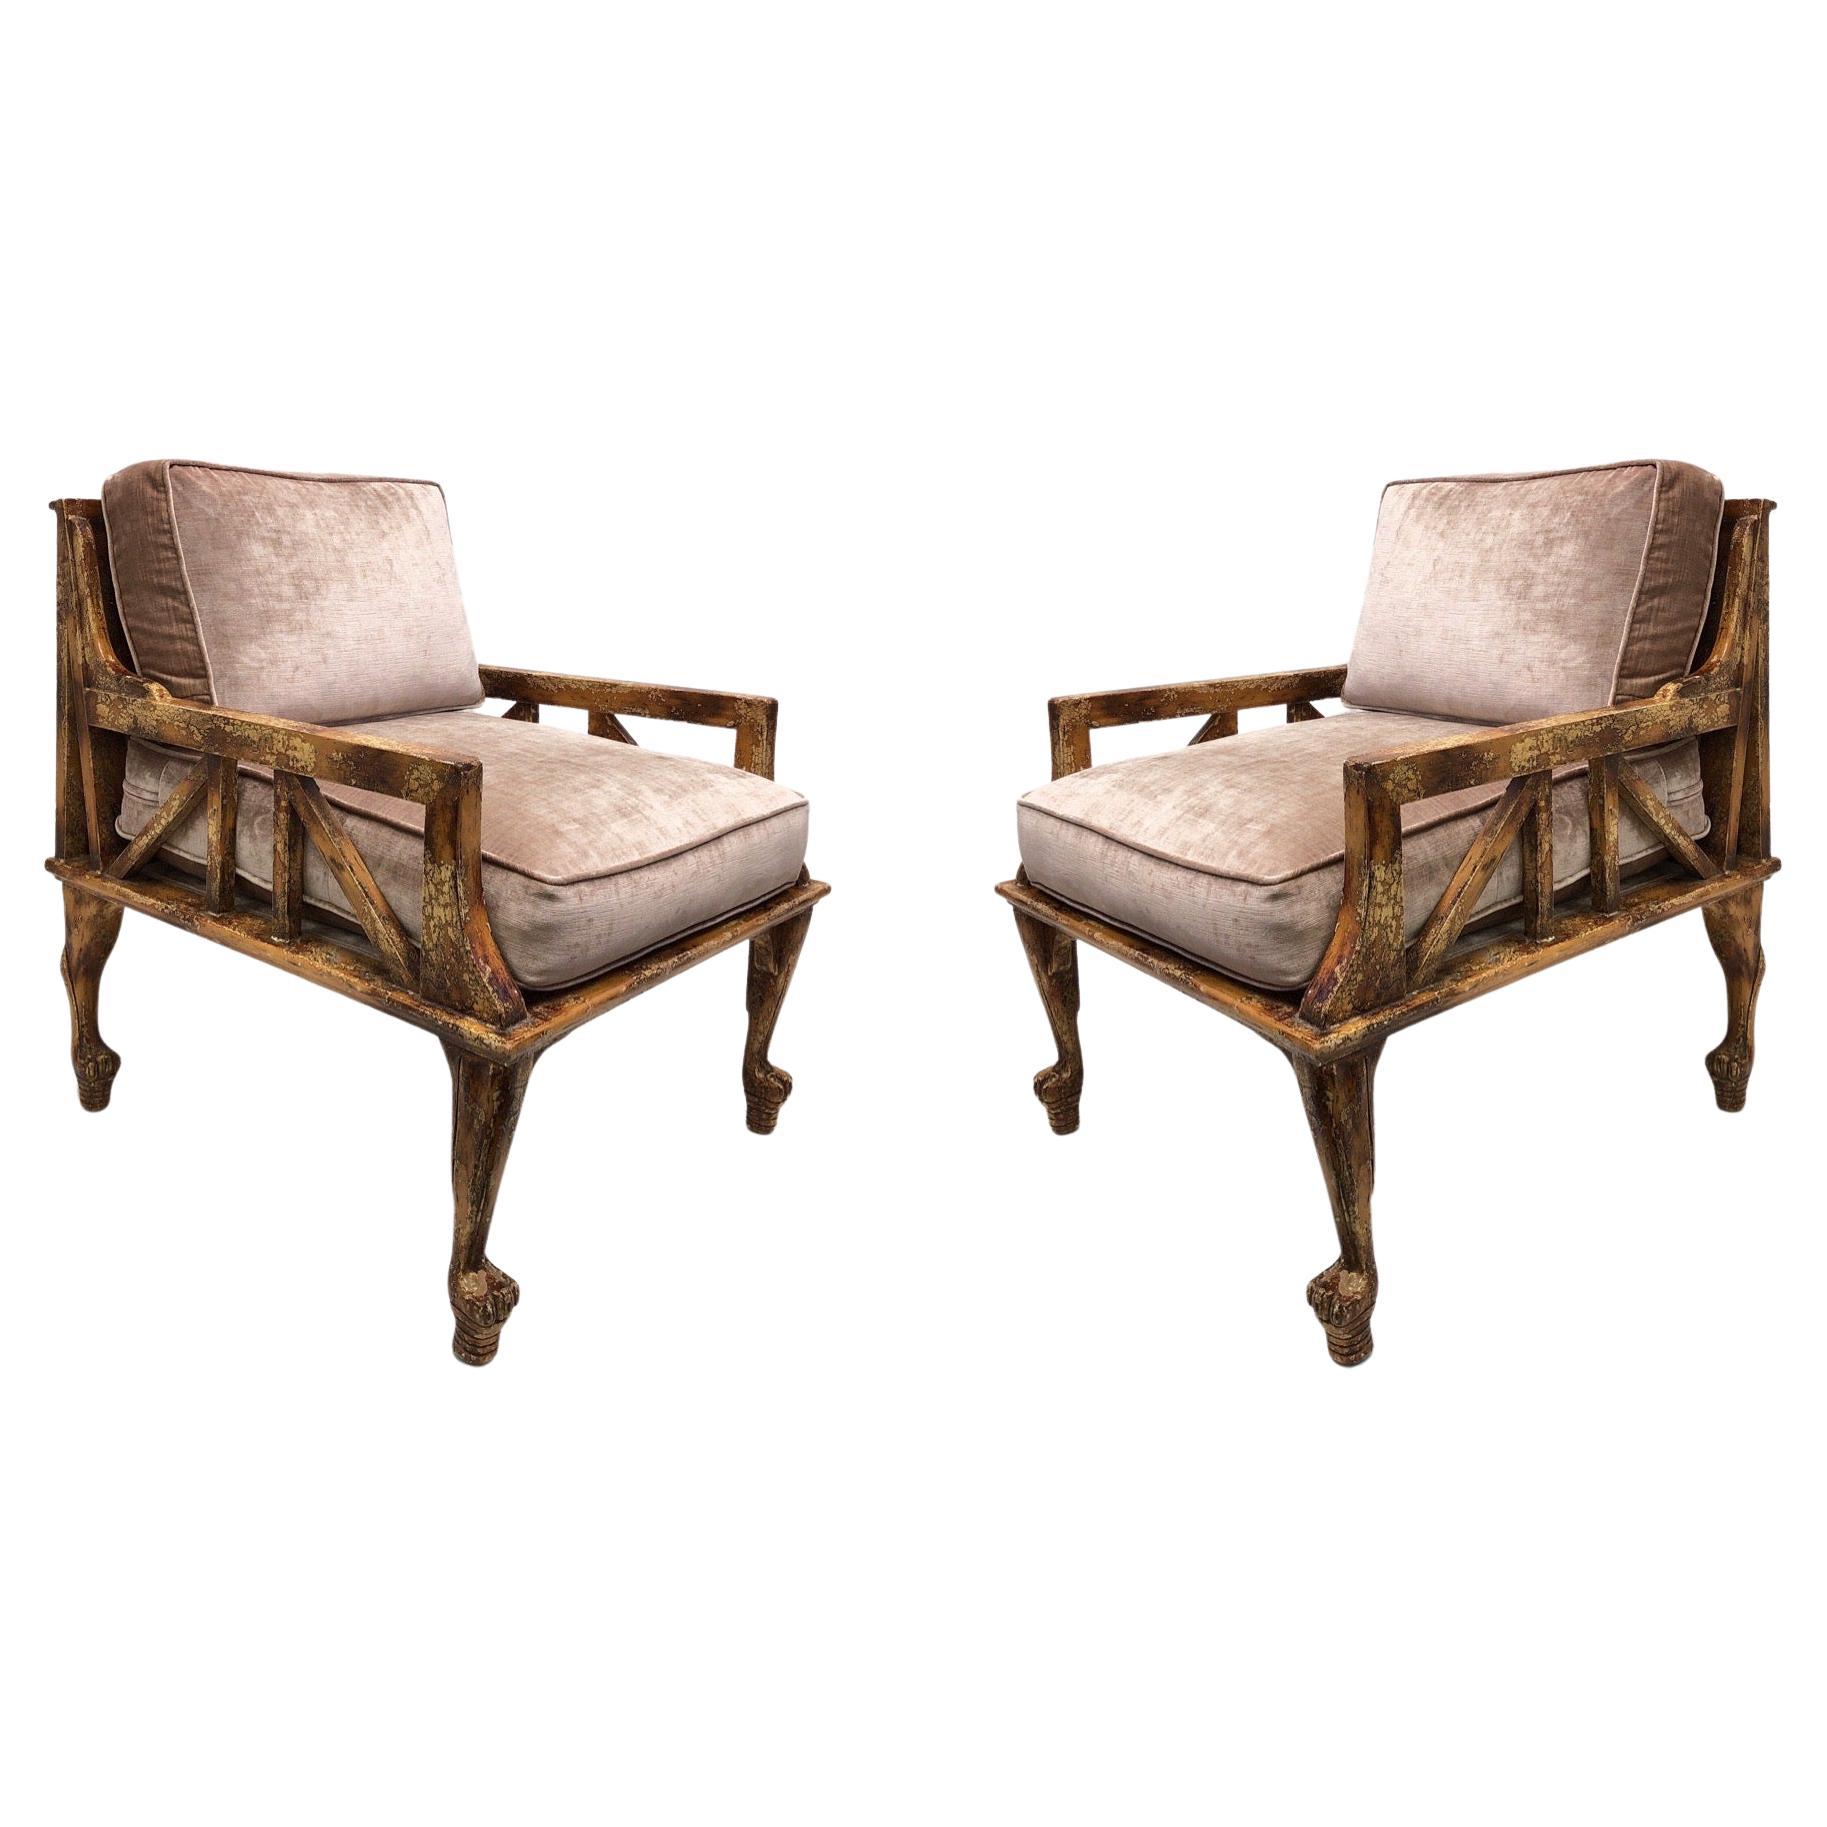 Pair of Thebes Club Chairs by Randolph & Hein for Steve Chase For Sale